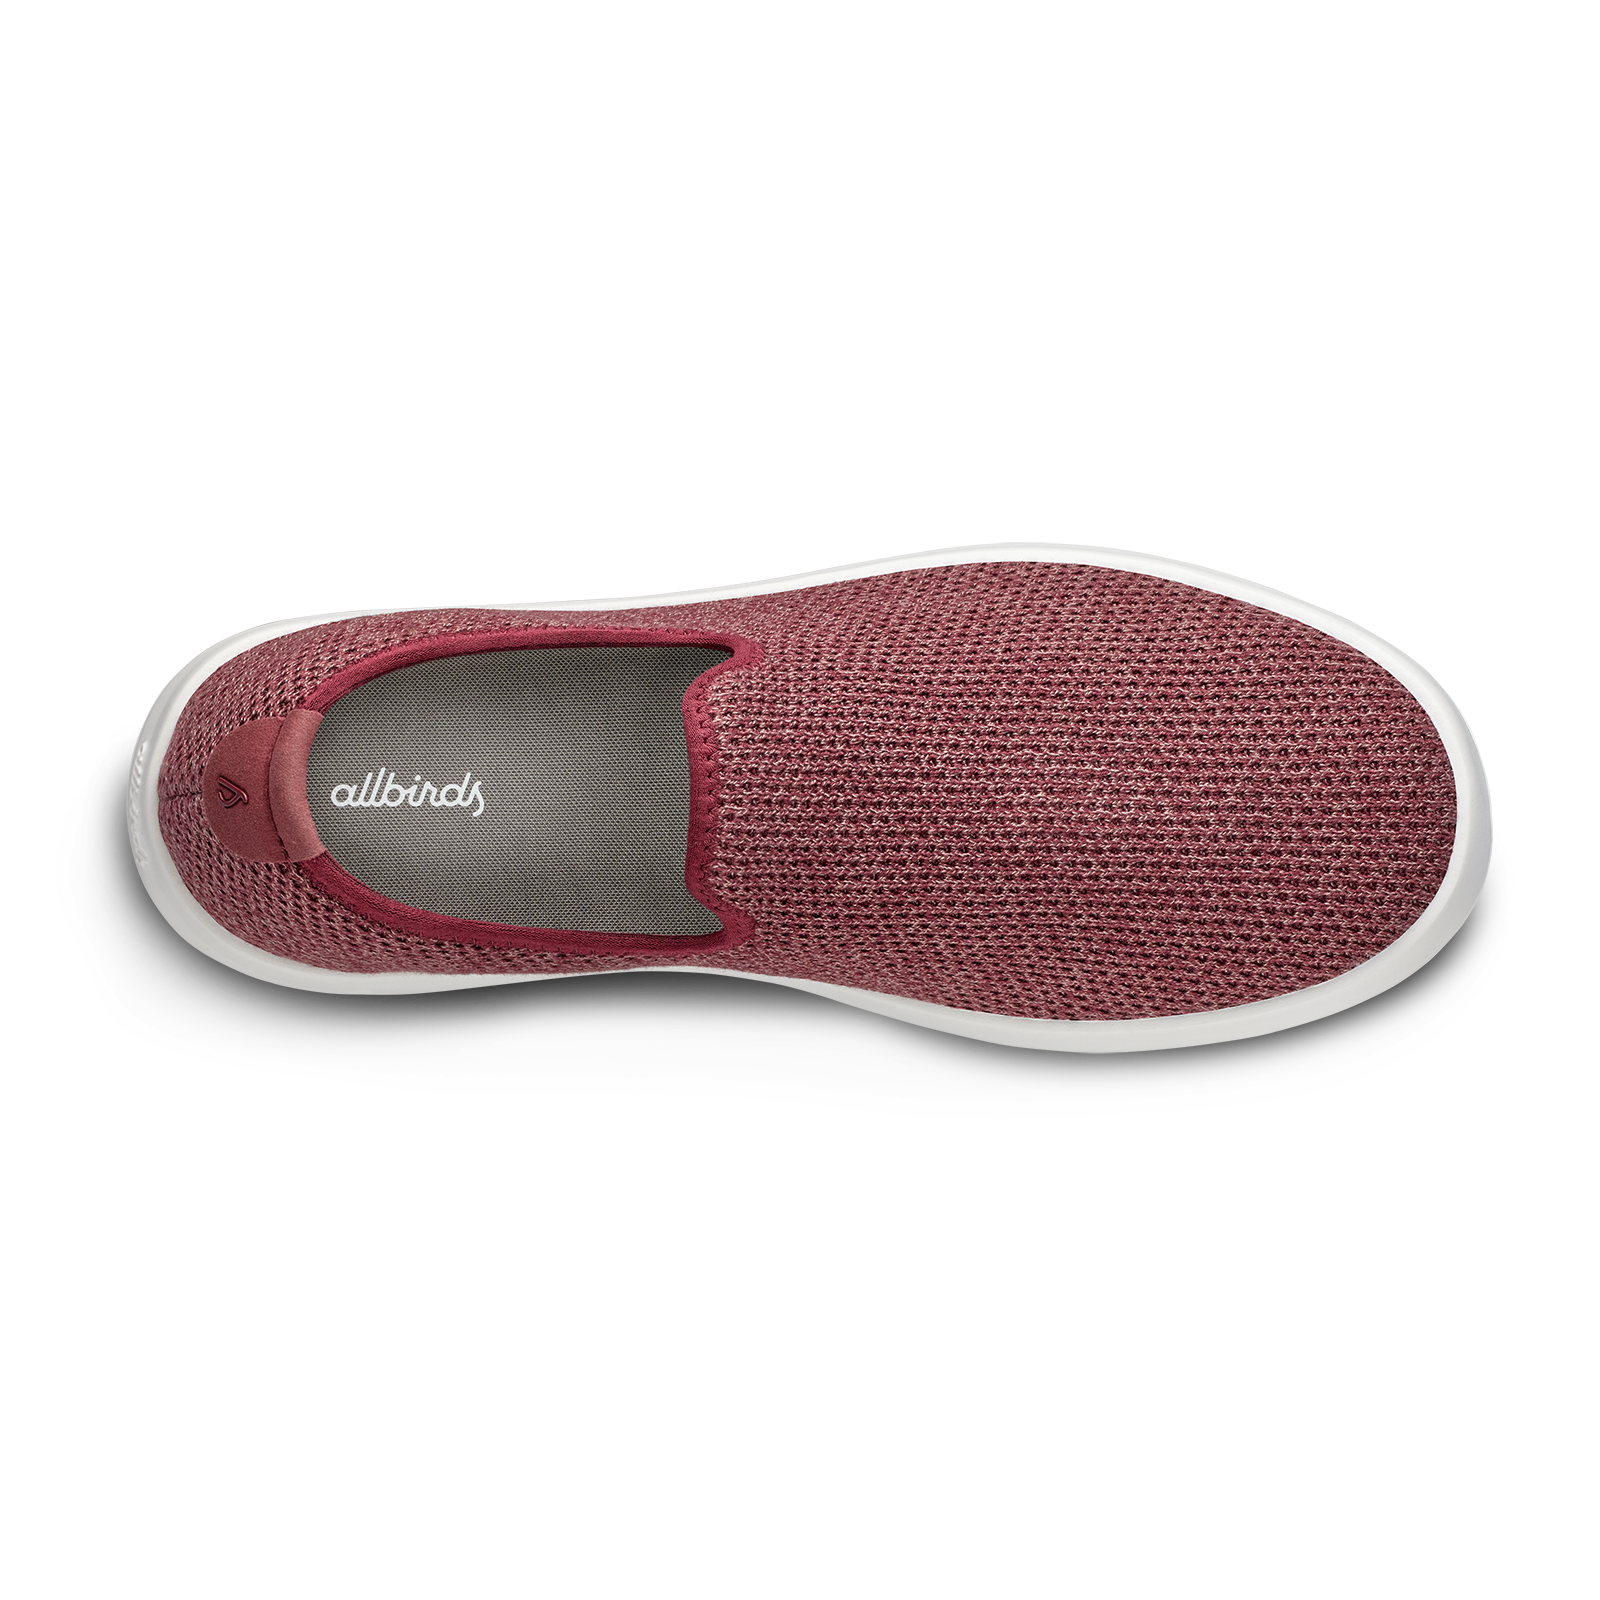 Men's Tree Loungers - Botanic Red (Blizzard Sole)